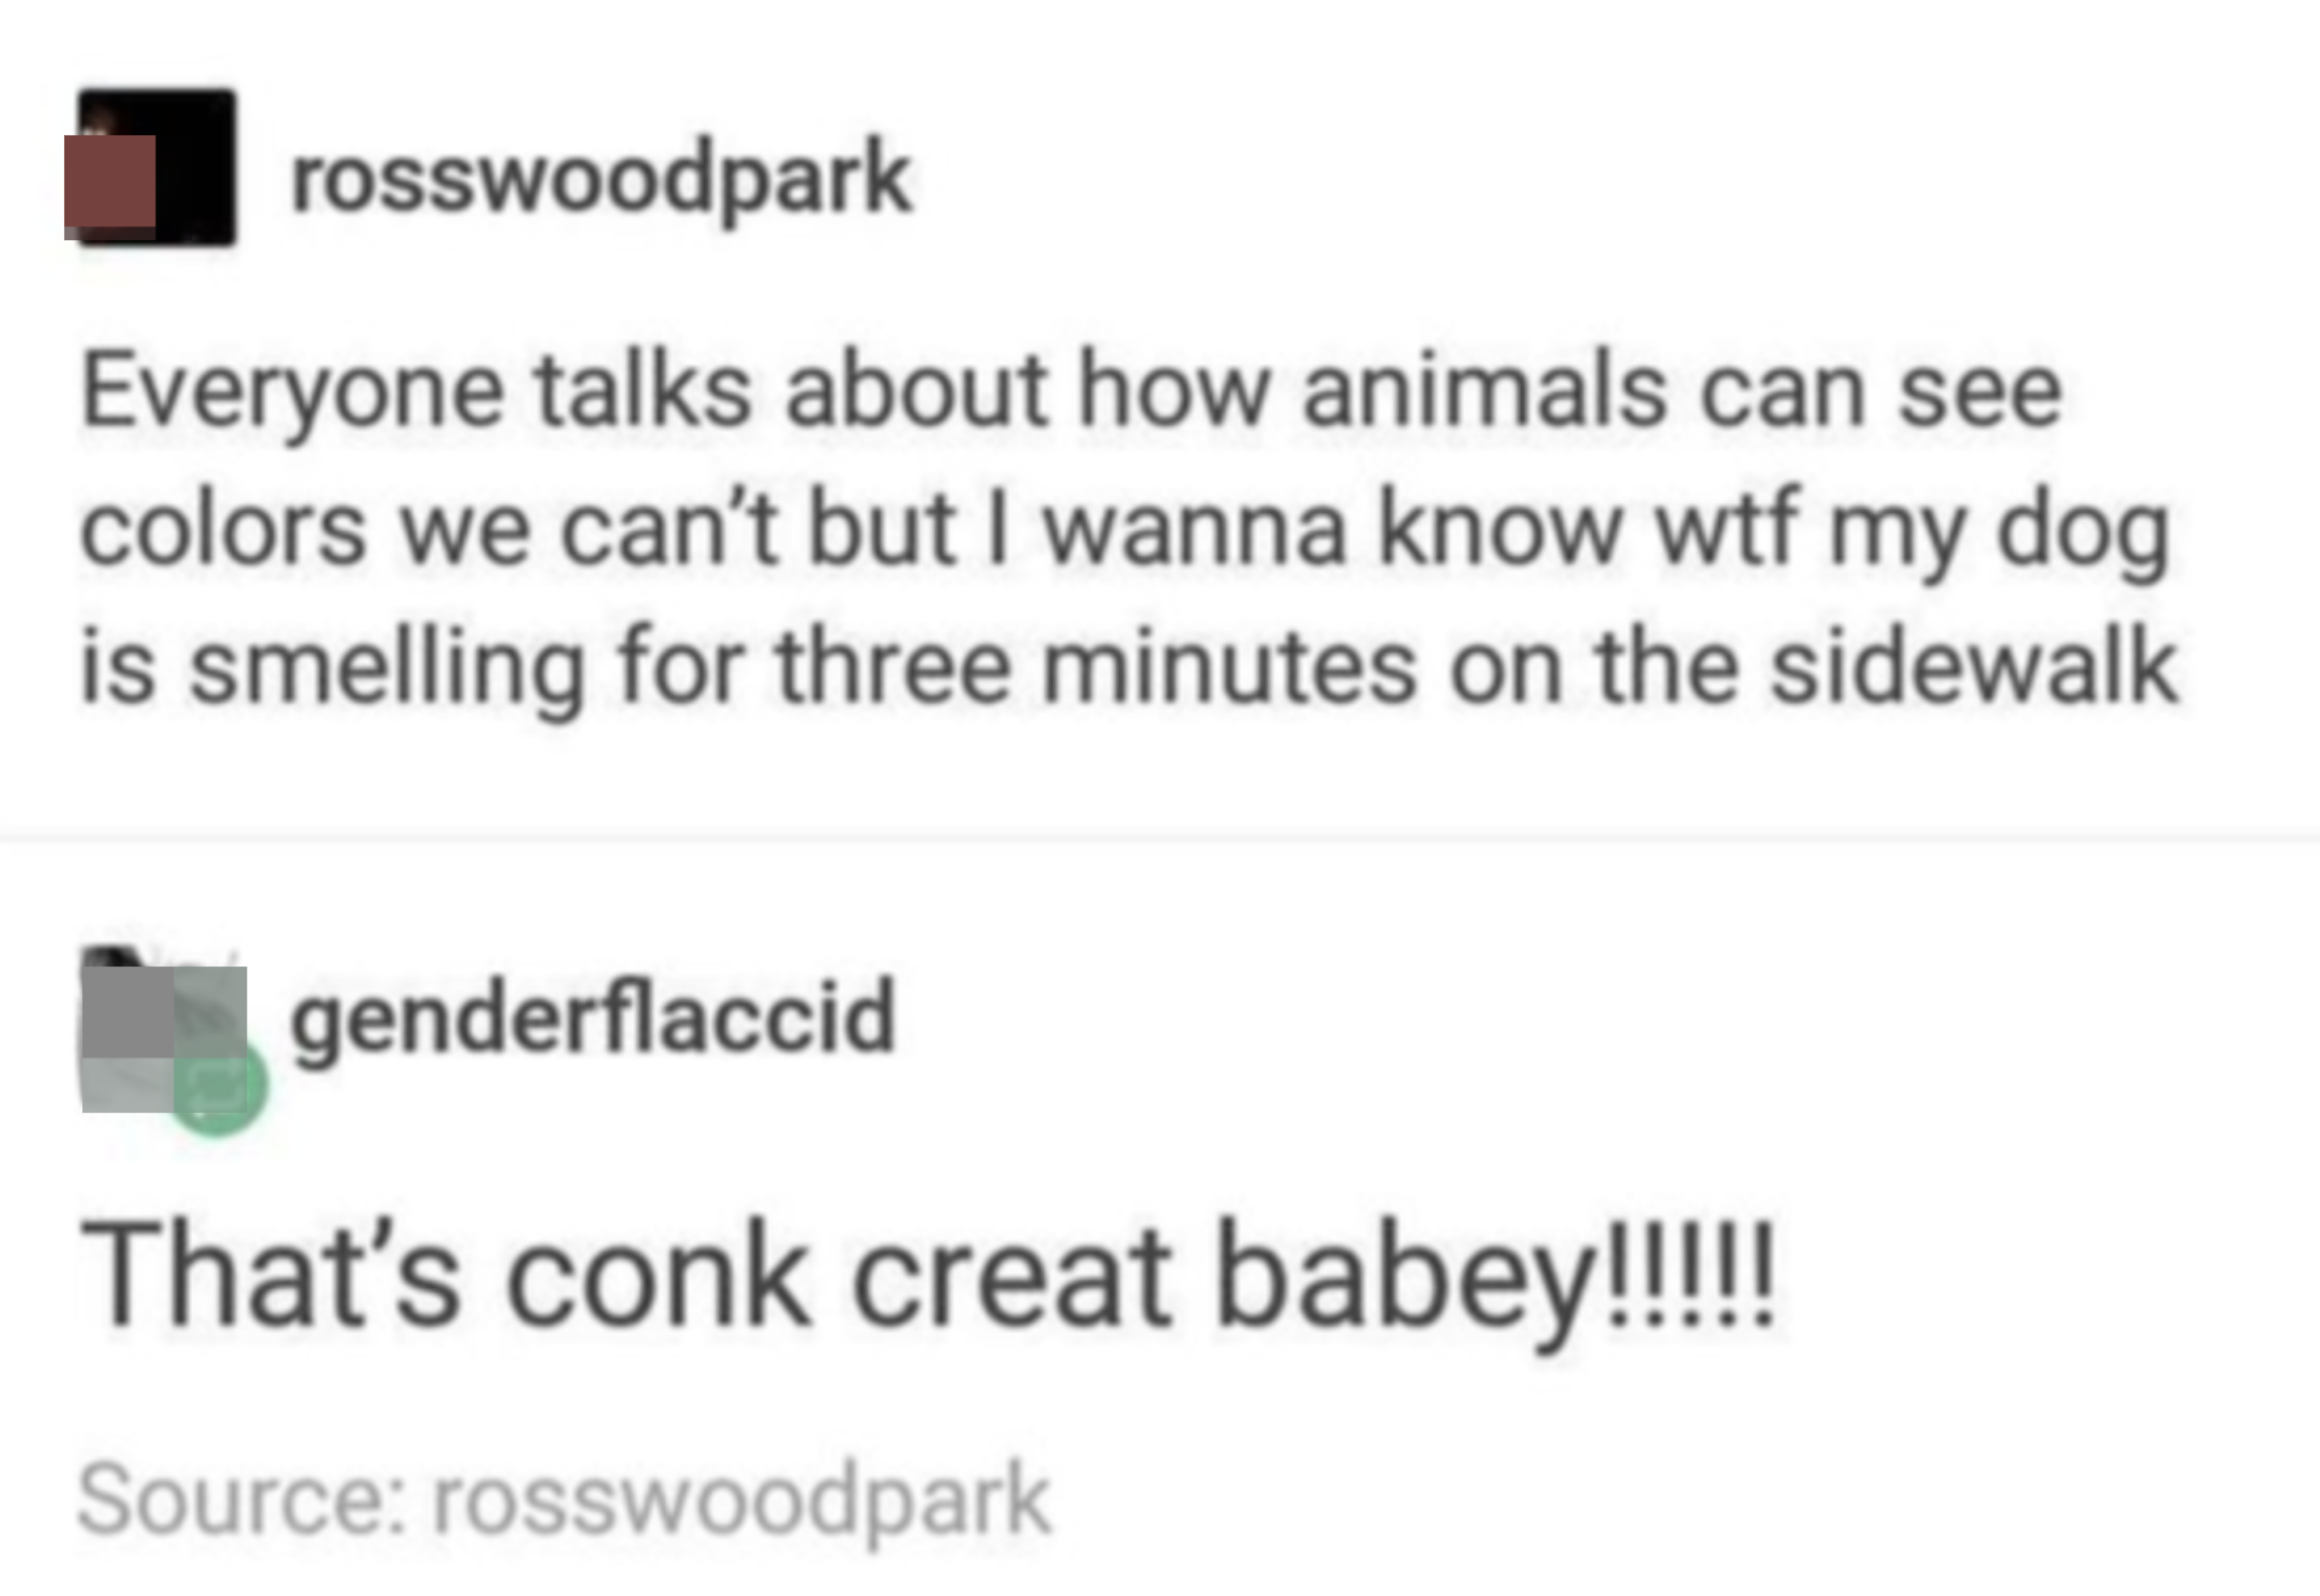 &quot;Everyone talks about how animals can see colors we can&#x27;t, but I wanna know wtf my dog is smelling for three minutes on the sidewalk,&quot; &quot;That&#x27;s conk creat babey!!!&quot;